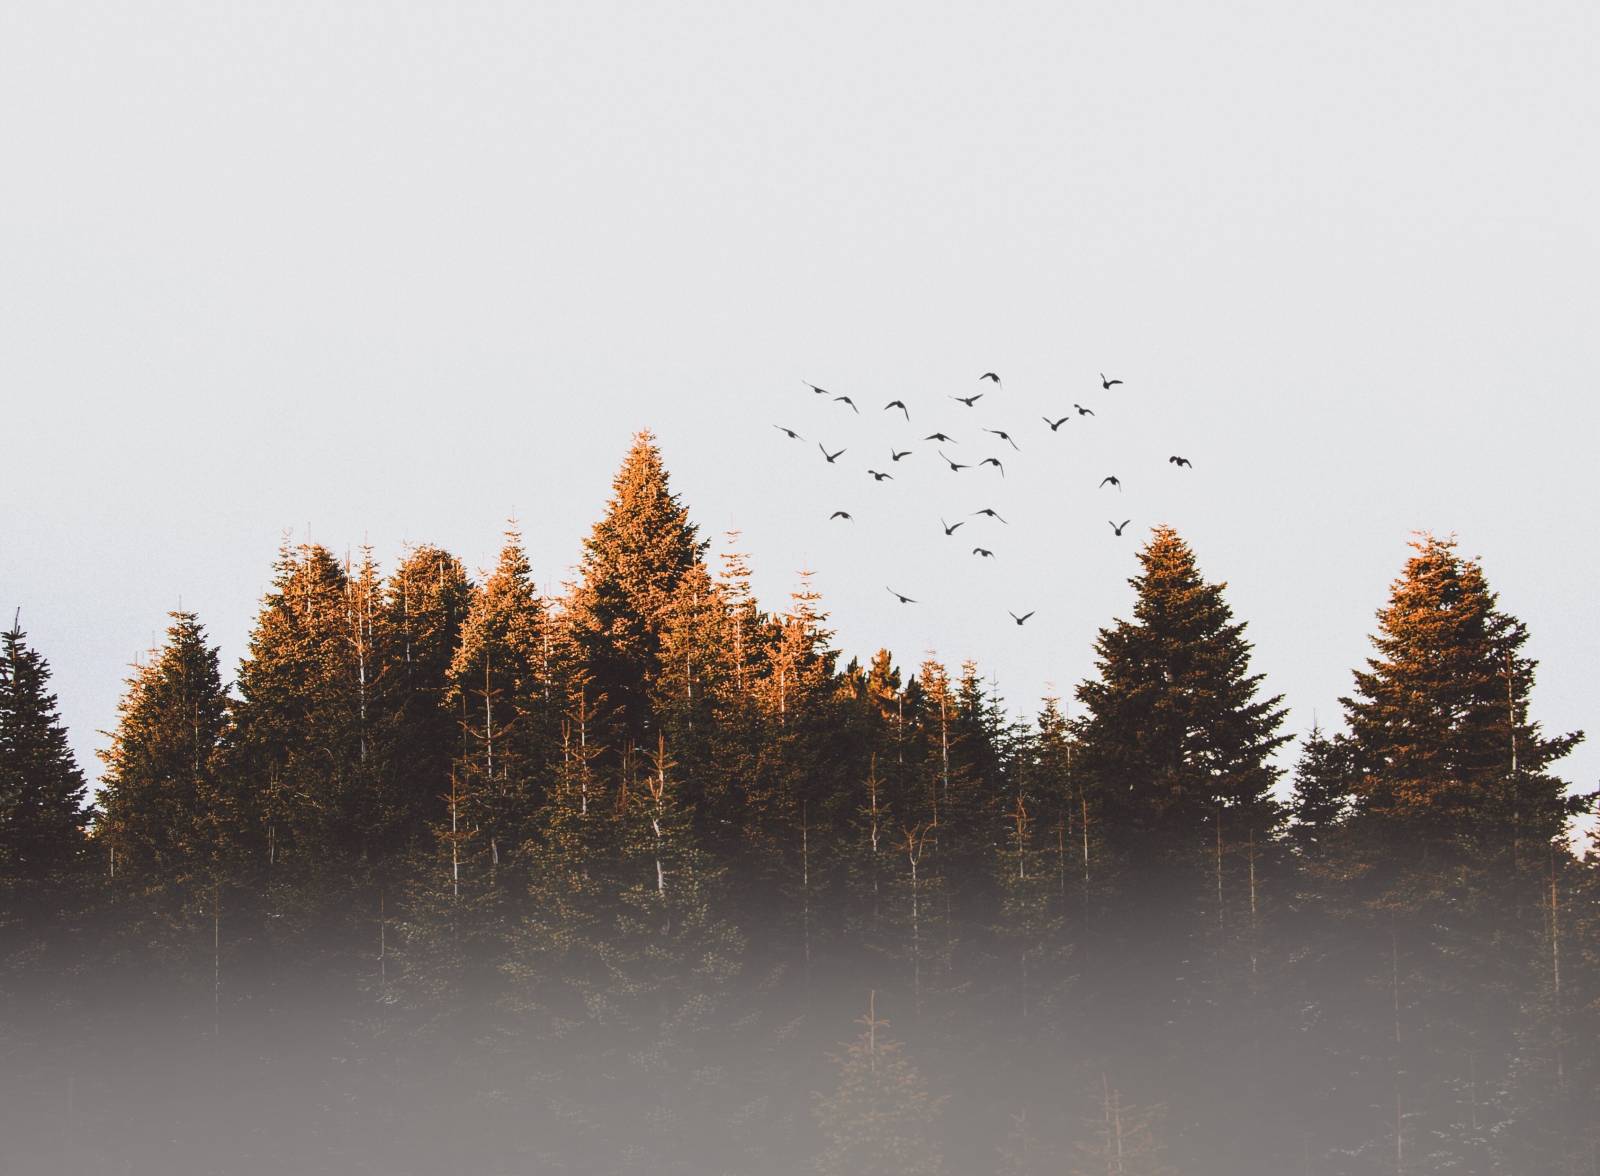 A flock of birds over a forest